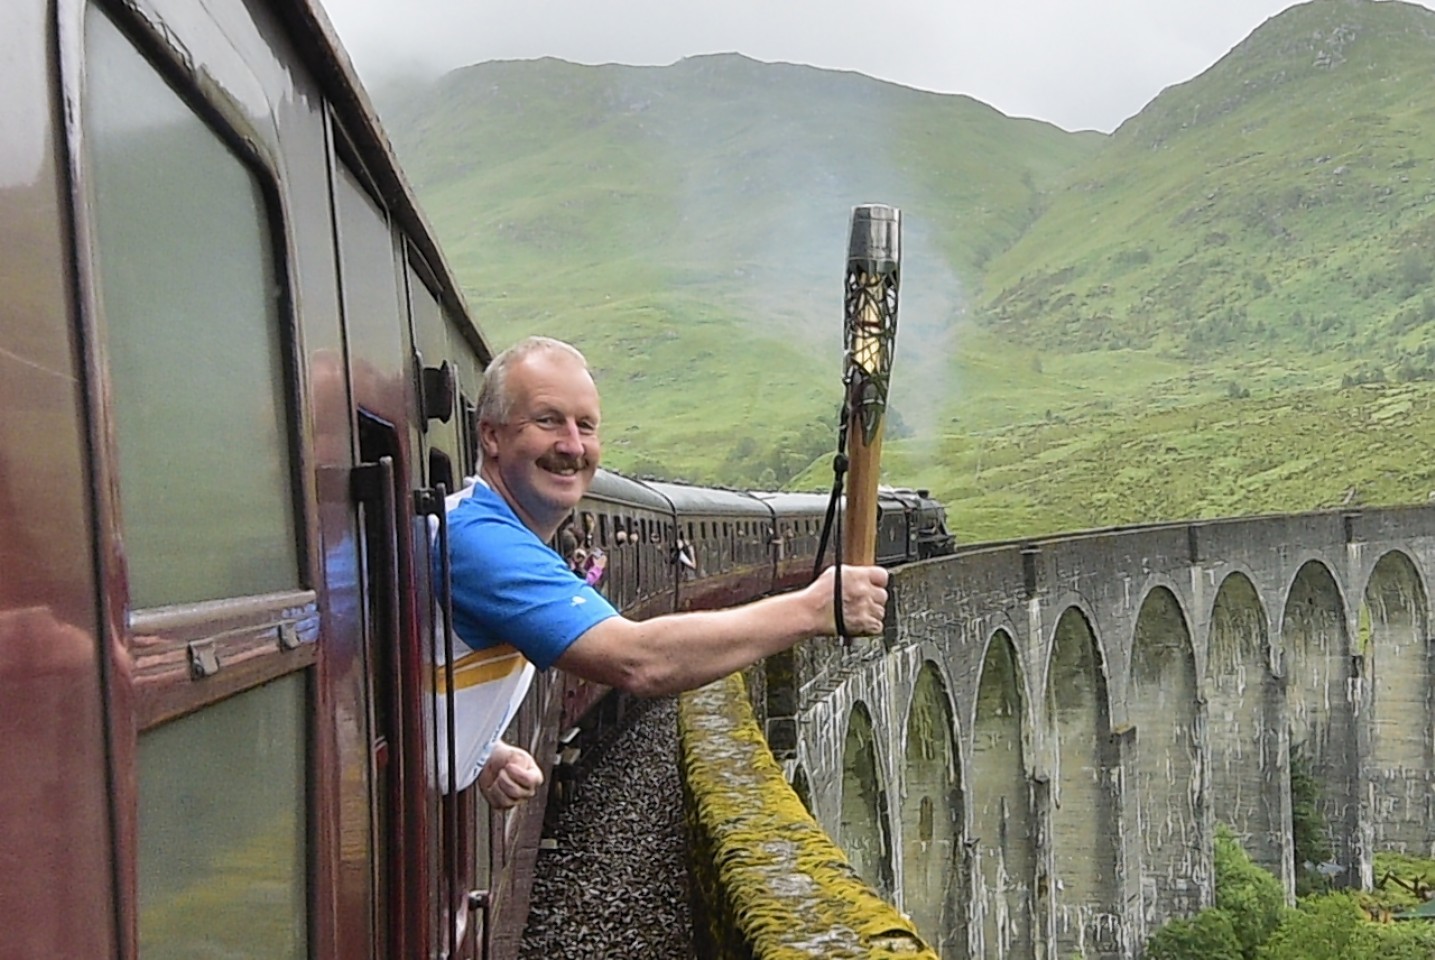 The Baton made part of its journey on the Hogwarts train